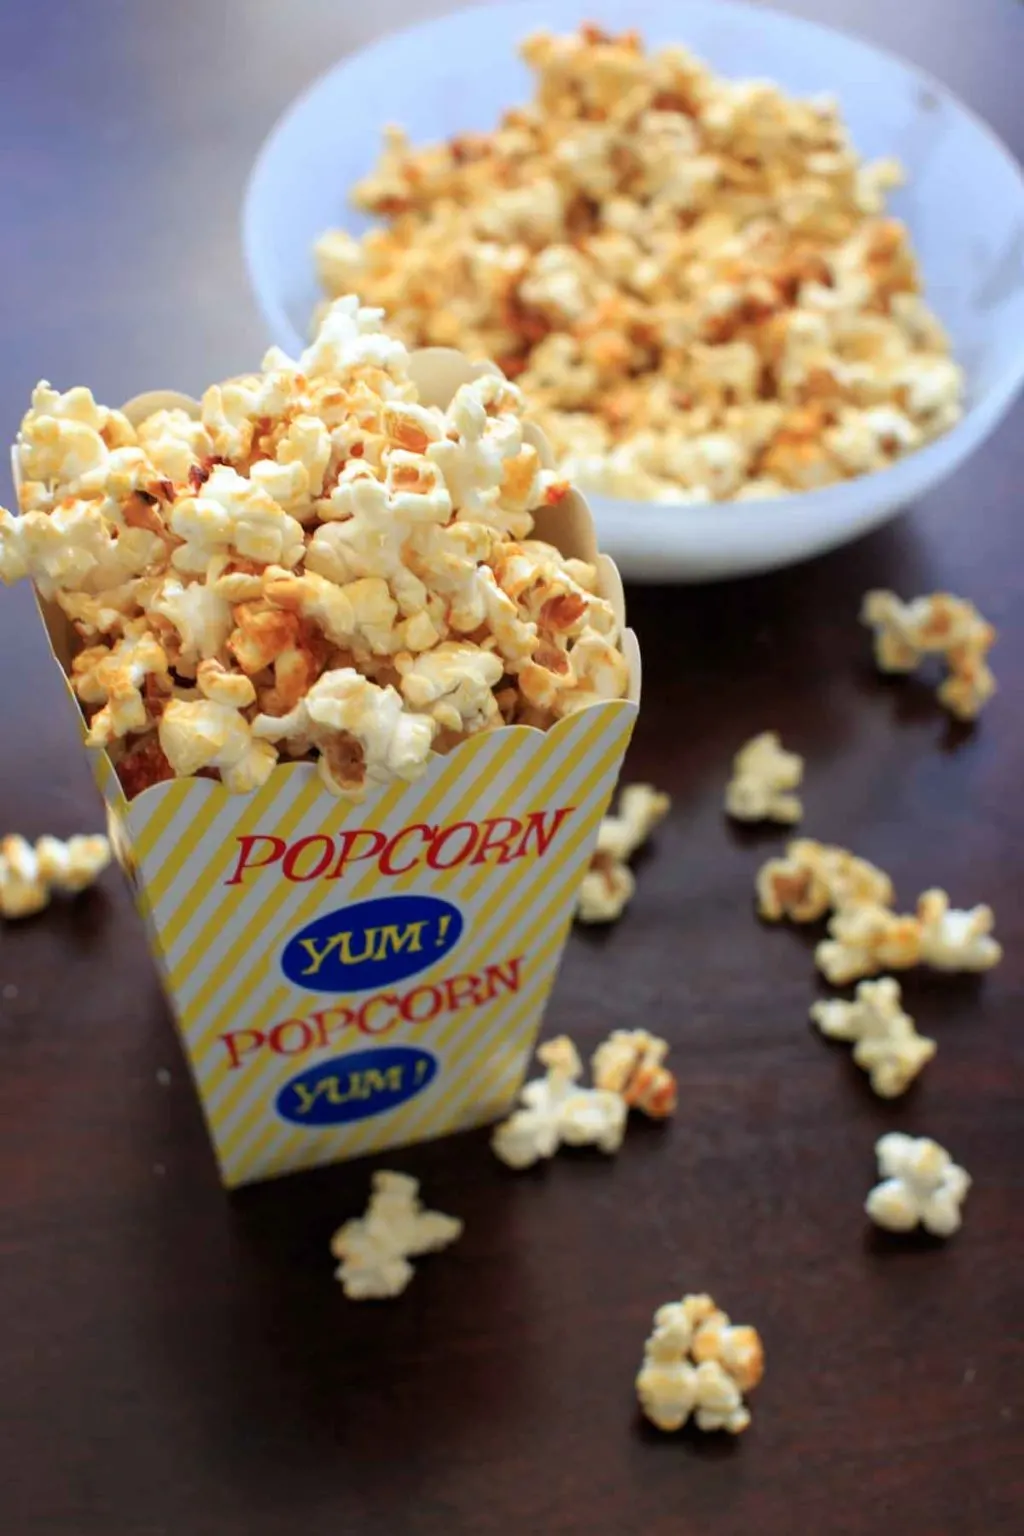 Sweet and salty kettle corn. A highly addictive, easy snack that takes 5 minutes and 4 ingredients!